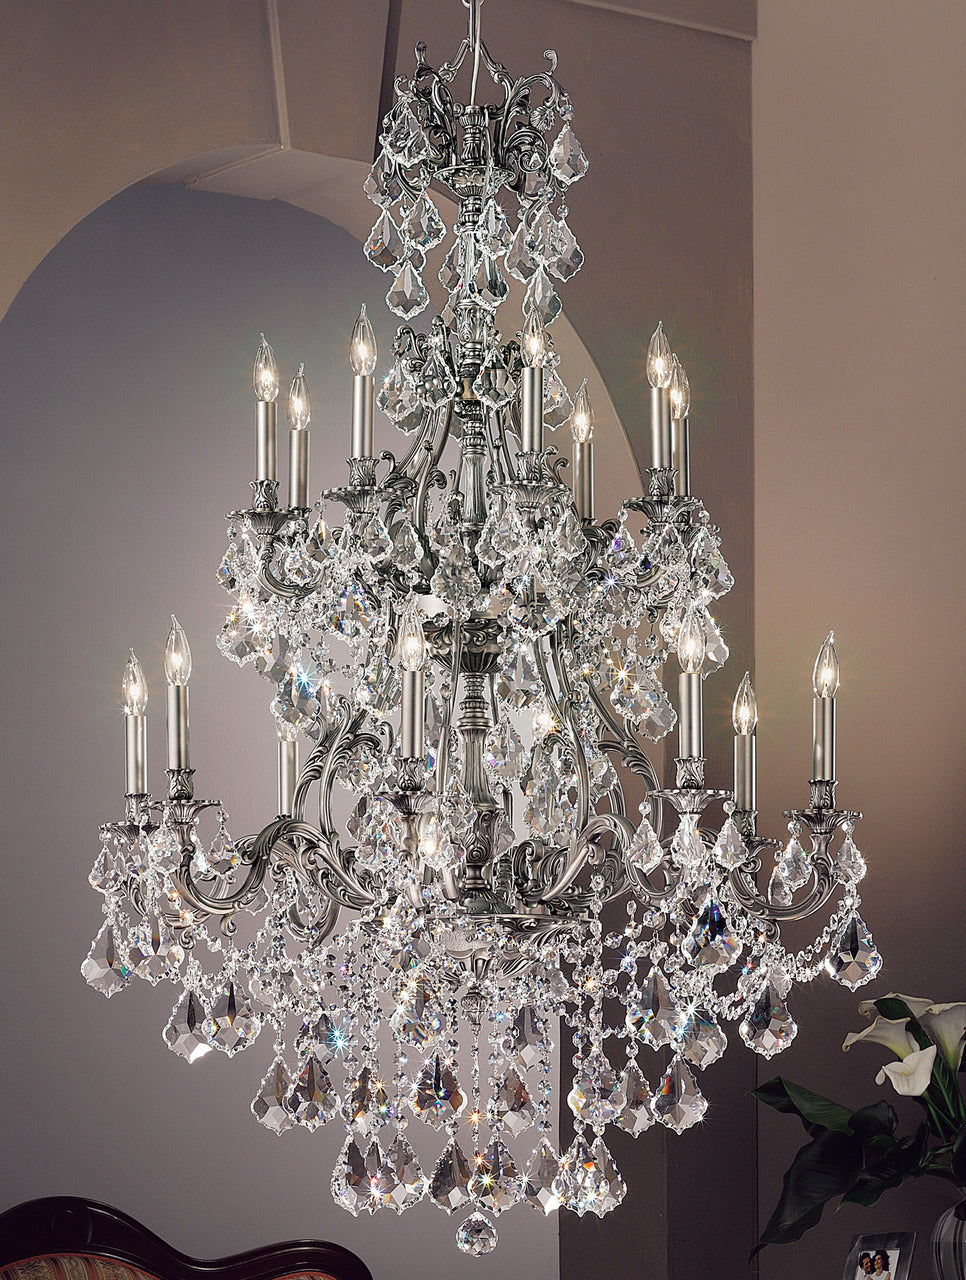 Classic Lighting 57357 AGP S Majestic Imperial Crystal Chandelier in Aged Pewter (Imported from Spain)